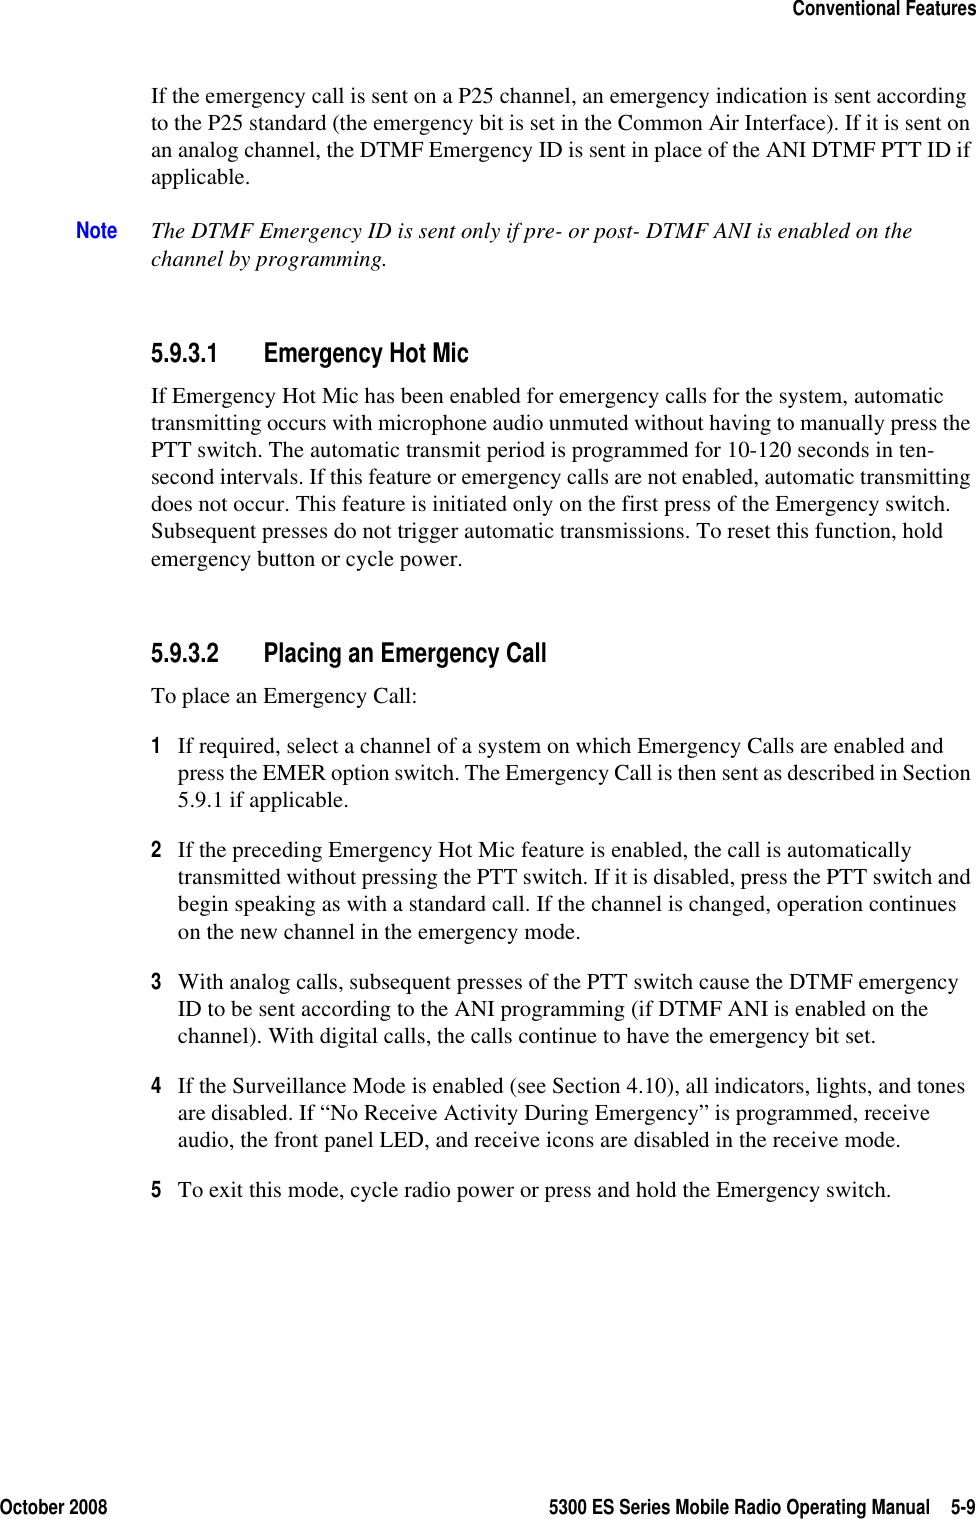 October 2008 5300 ES Series Mobile Radio Operating Manual 5-9Conventional FeaturesIf the emergency call is sent on a P25 channel, an emergency indication is sent according to the P25 standard (the emergency bit is set in the Common Air Interface). If it is sent on an analog channel, the DTMF Emergency ID is sent in place of the ANI DTMF PTT ID if applicable.Note The DTMF Emergency ID is sent only if pre- or post- DTMF ANI is enabled on the channel by programming.5.9.3.1 Emergency Hot MicIf Emergency Hot Mic has been enabled for emergency calls for the system, automatic transmitting occurs with microphone audio unmuted without having to manually press the PTT switch. The automatic transmit period is programmed for 10-120 seconds in ten-second intervals. If this feature or emergency calls are not enabled, automatic transmitting does not occur. This feature is initiated only on the first press of the Emergency switch. Subsequent presses do not trigger automatic transmissions. To reset this function, hold emergency button or cycle power.5.9.3.2 Placing an Emergency CallTo place an Emergency Call:1If required, select a channel of a system on which Emergency Calls are enabled and press the EMER option switch. The Emergency Call is then sent as described in Section 5.9.1 if applicable.2If the preceding Emergency Hot Mic feature is enabled, the call is automatically transmitted without pressing the PTT switch. If it is disabled, press the PTT switch and begin speaking as with a standard call. If the channel is changed, operation continues on the new channel in the emergency mode.3With analog calls, subsequent presses of the PTT switch cause the DTMF emergency ID to be sent according to the ANI programming (if DTMF ANI is enabled on the channel). With digital calls, the calls continue to have the emergency bit set.4If the Surveillance Mode is enabled (see Section 4.10), all indicators, lights, and tones are disabled. If “No Receive Activity During Emergency” is programmed, receive audio, the front panel LED, and receive icons are disabled in the receive mode.5To exit this mode, cycle radio power or press and hold the Emergency switch.